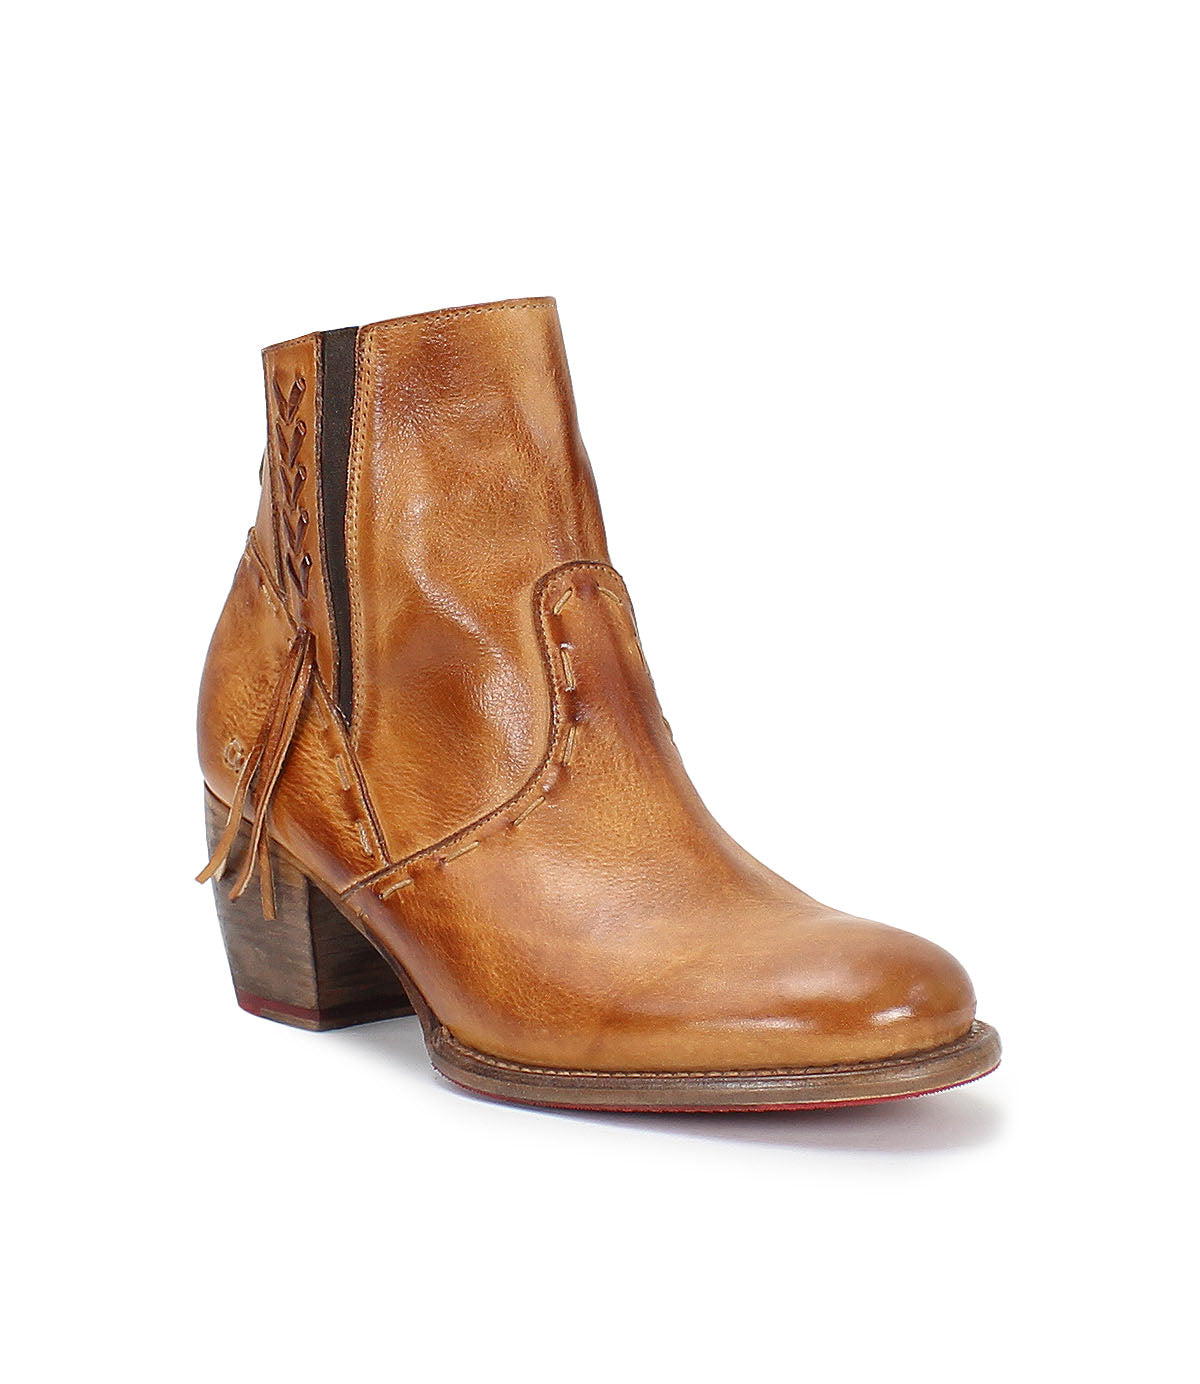 A Celestine women's ankle boot in tan leather by Bed Stu.